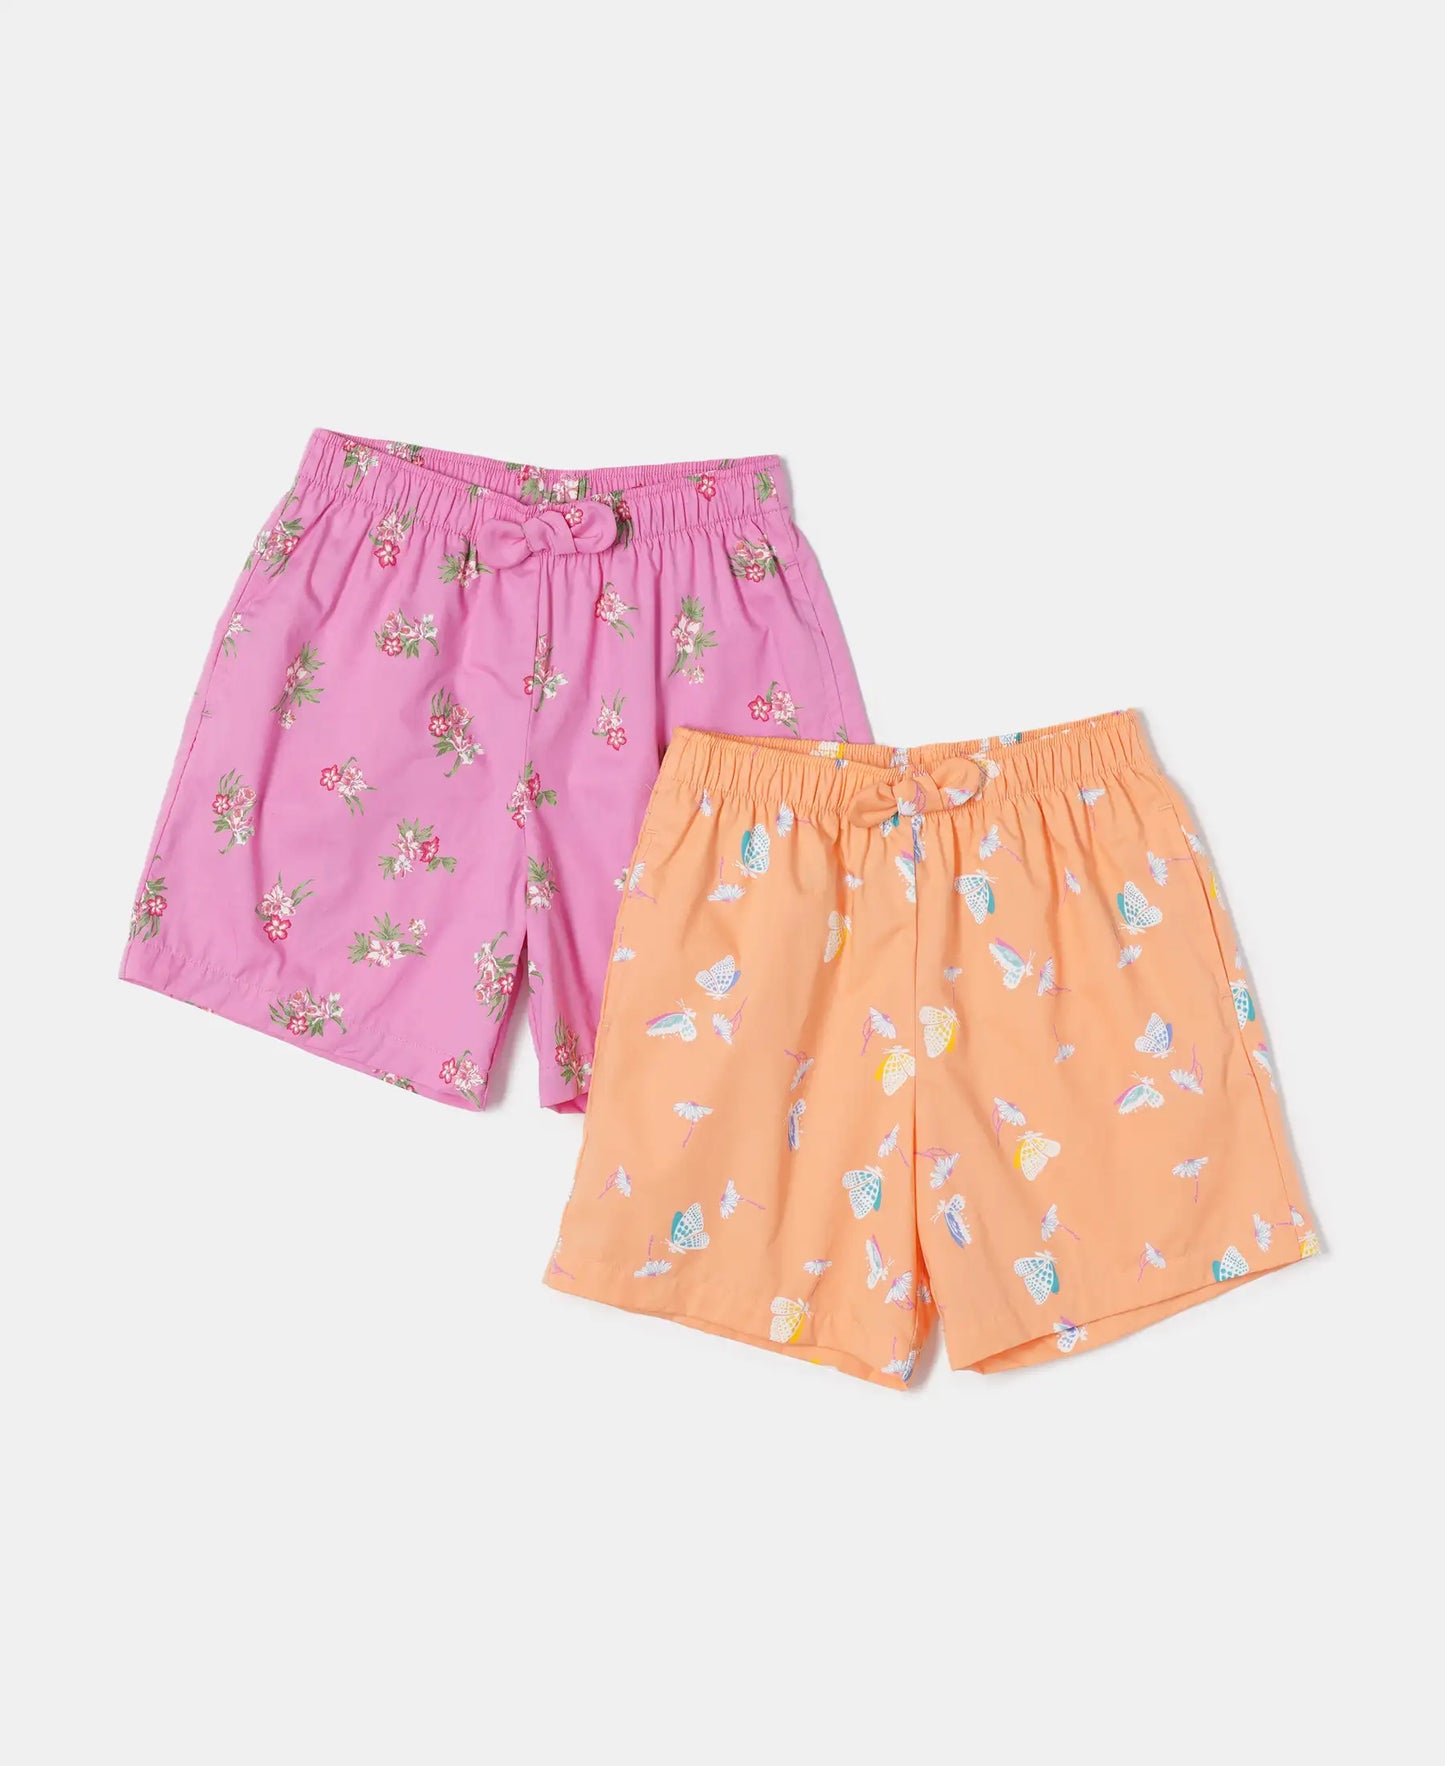 Super Combed Cotton Woven Printed Shorts - Assorted Color & Printed (Pack of 2)